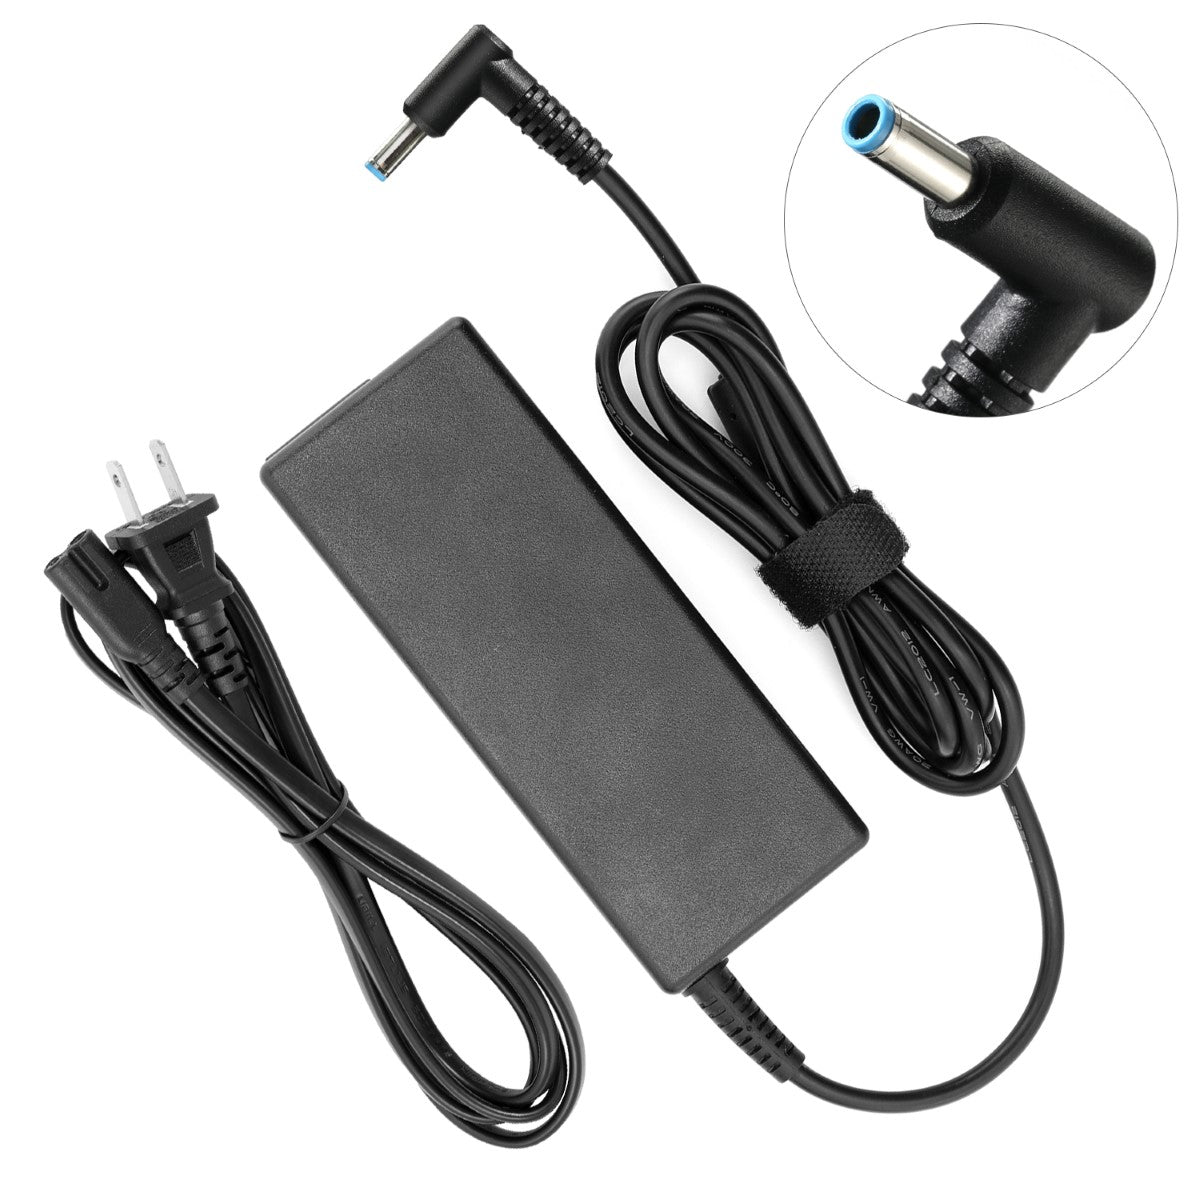 AC Adapter Charger for HP Pavilion Touchsmart 17-f012ng Notebook.